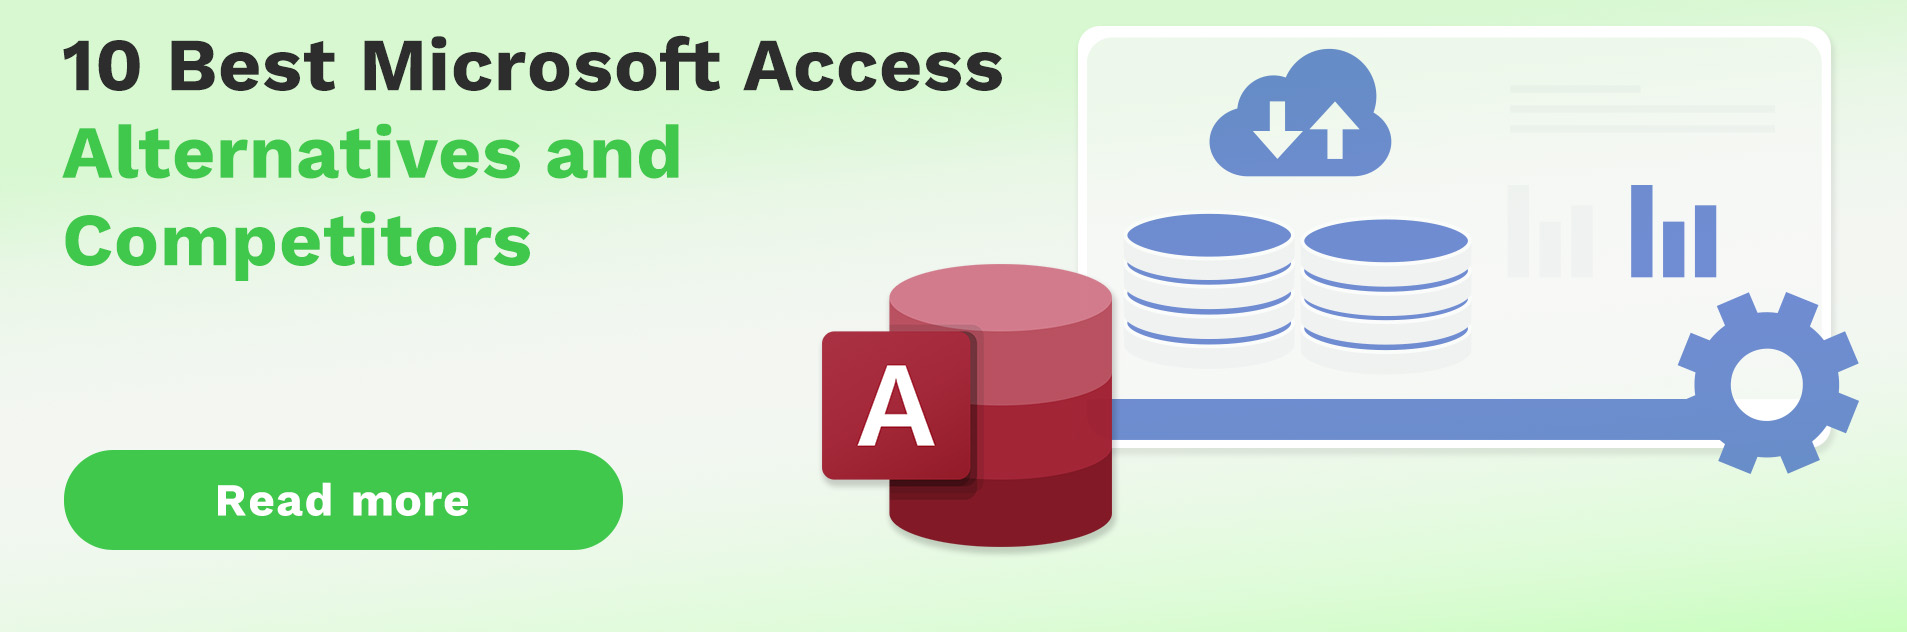 10 Best Microsoft Access Alternatives and Competitors